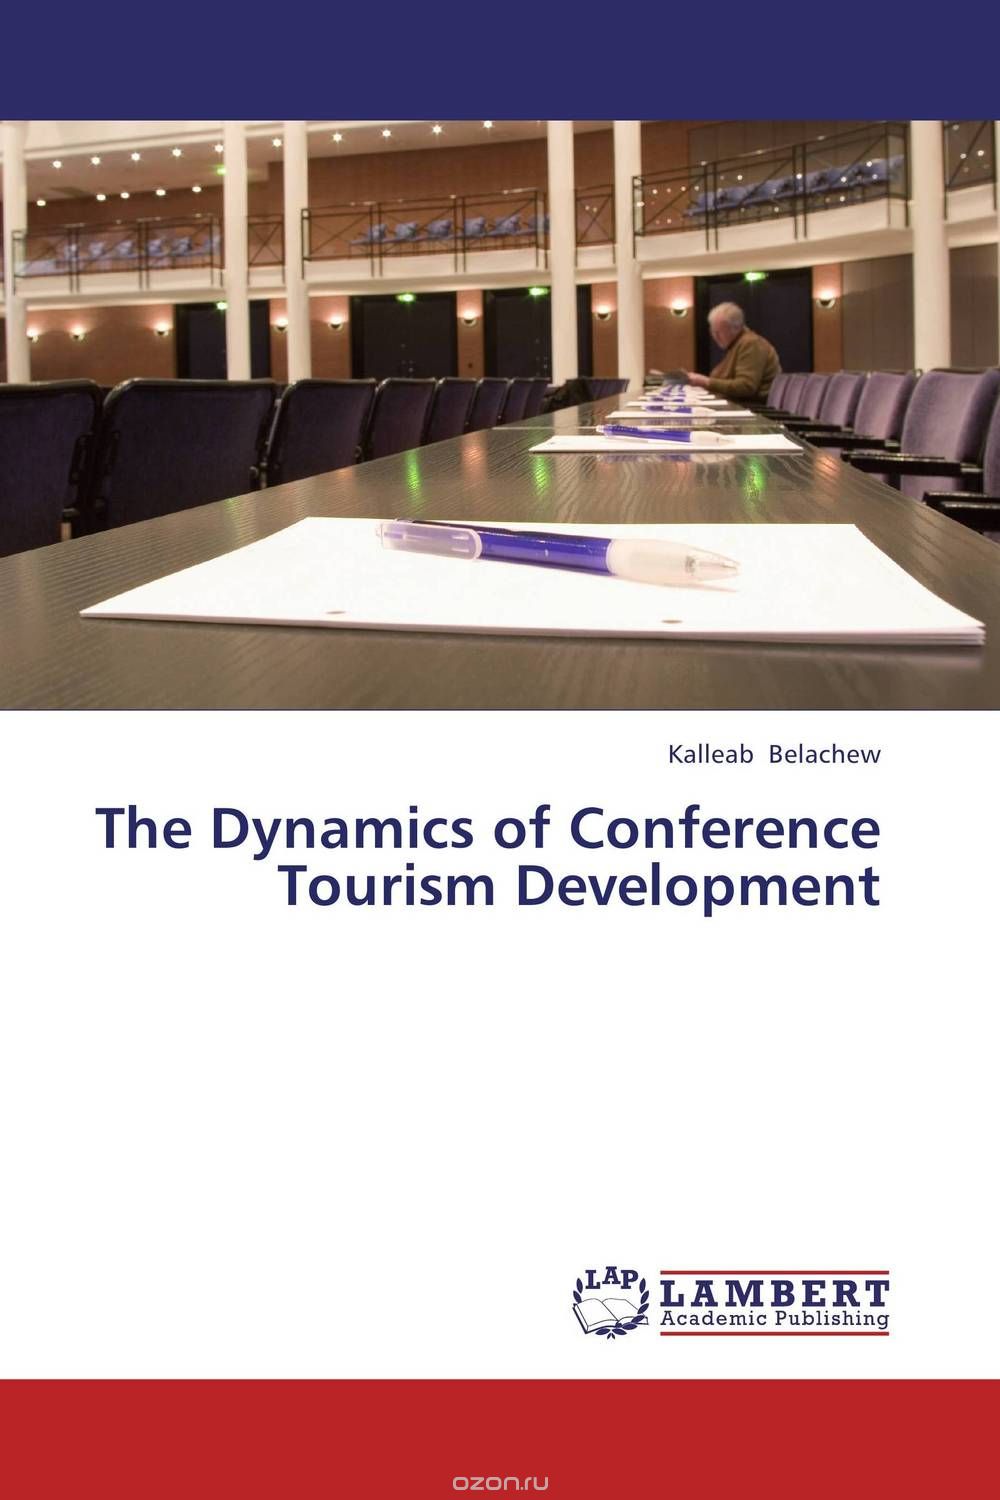 The Dynamics of Conference Tourism Development